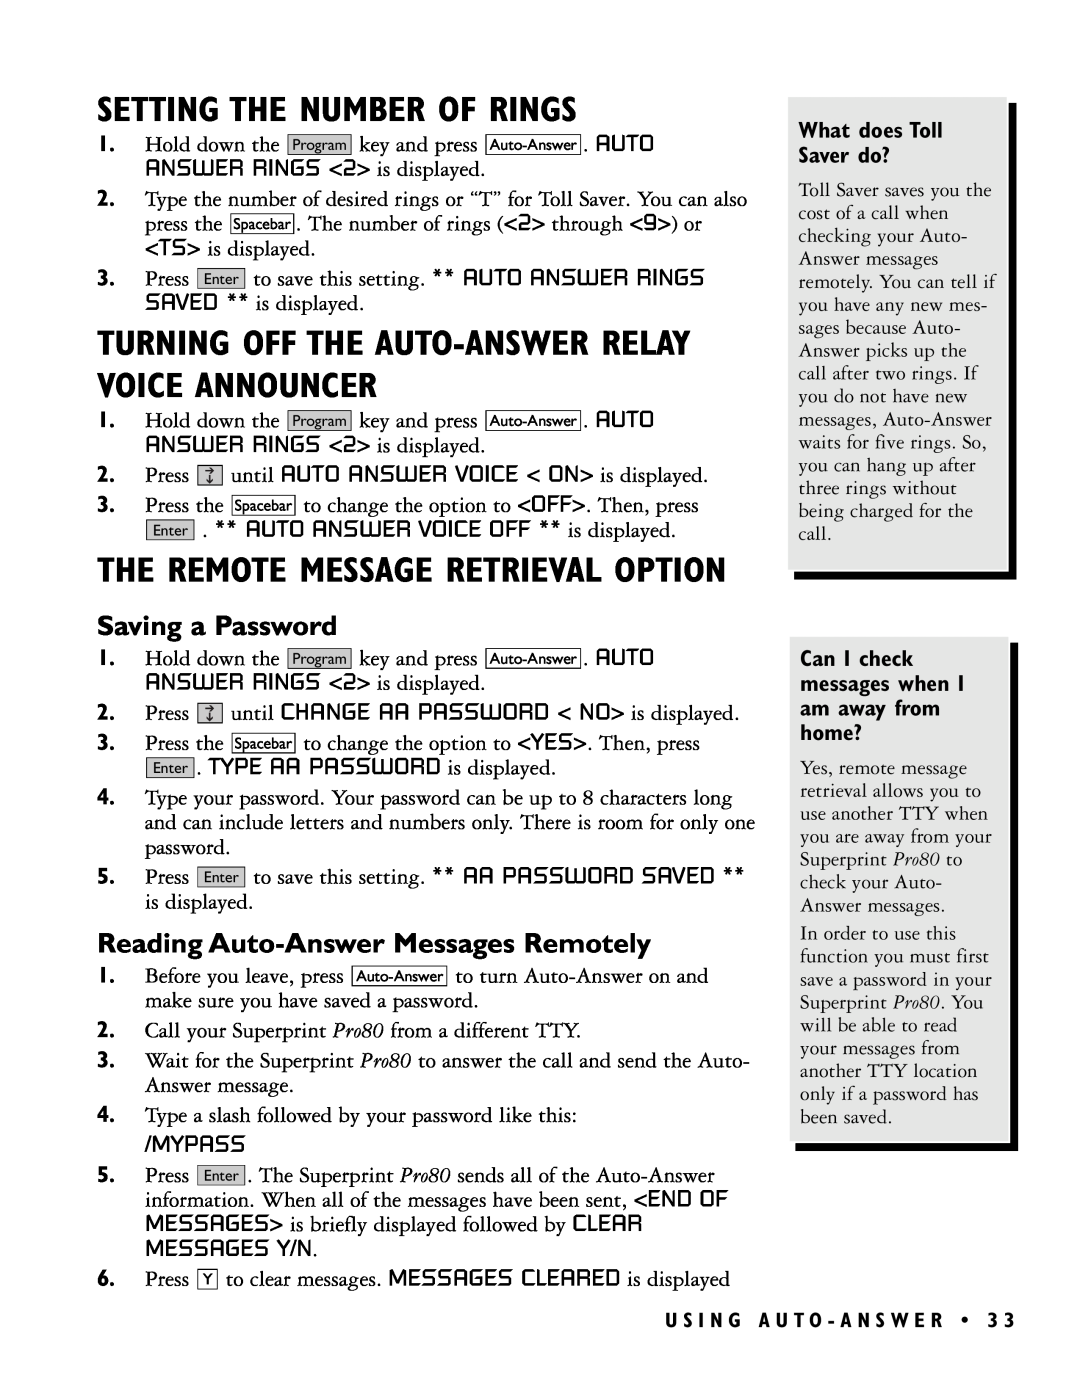 Ultratec PRO80TM manual Setting The Number Of Rings, Turning Off The Auto-Answer Relay Voice Announcer, Saving a Password 